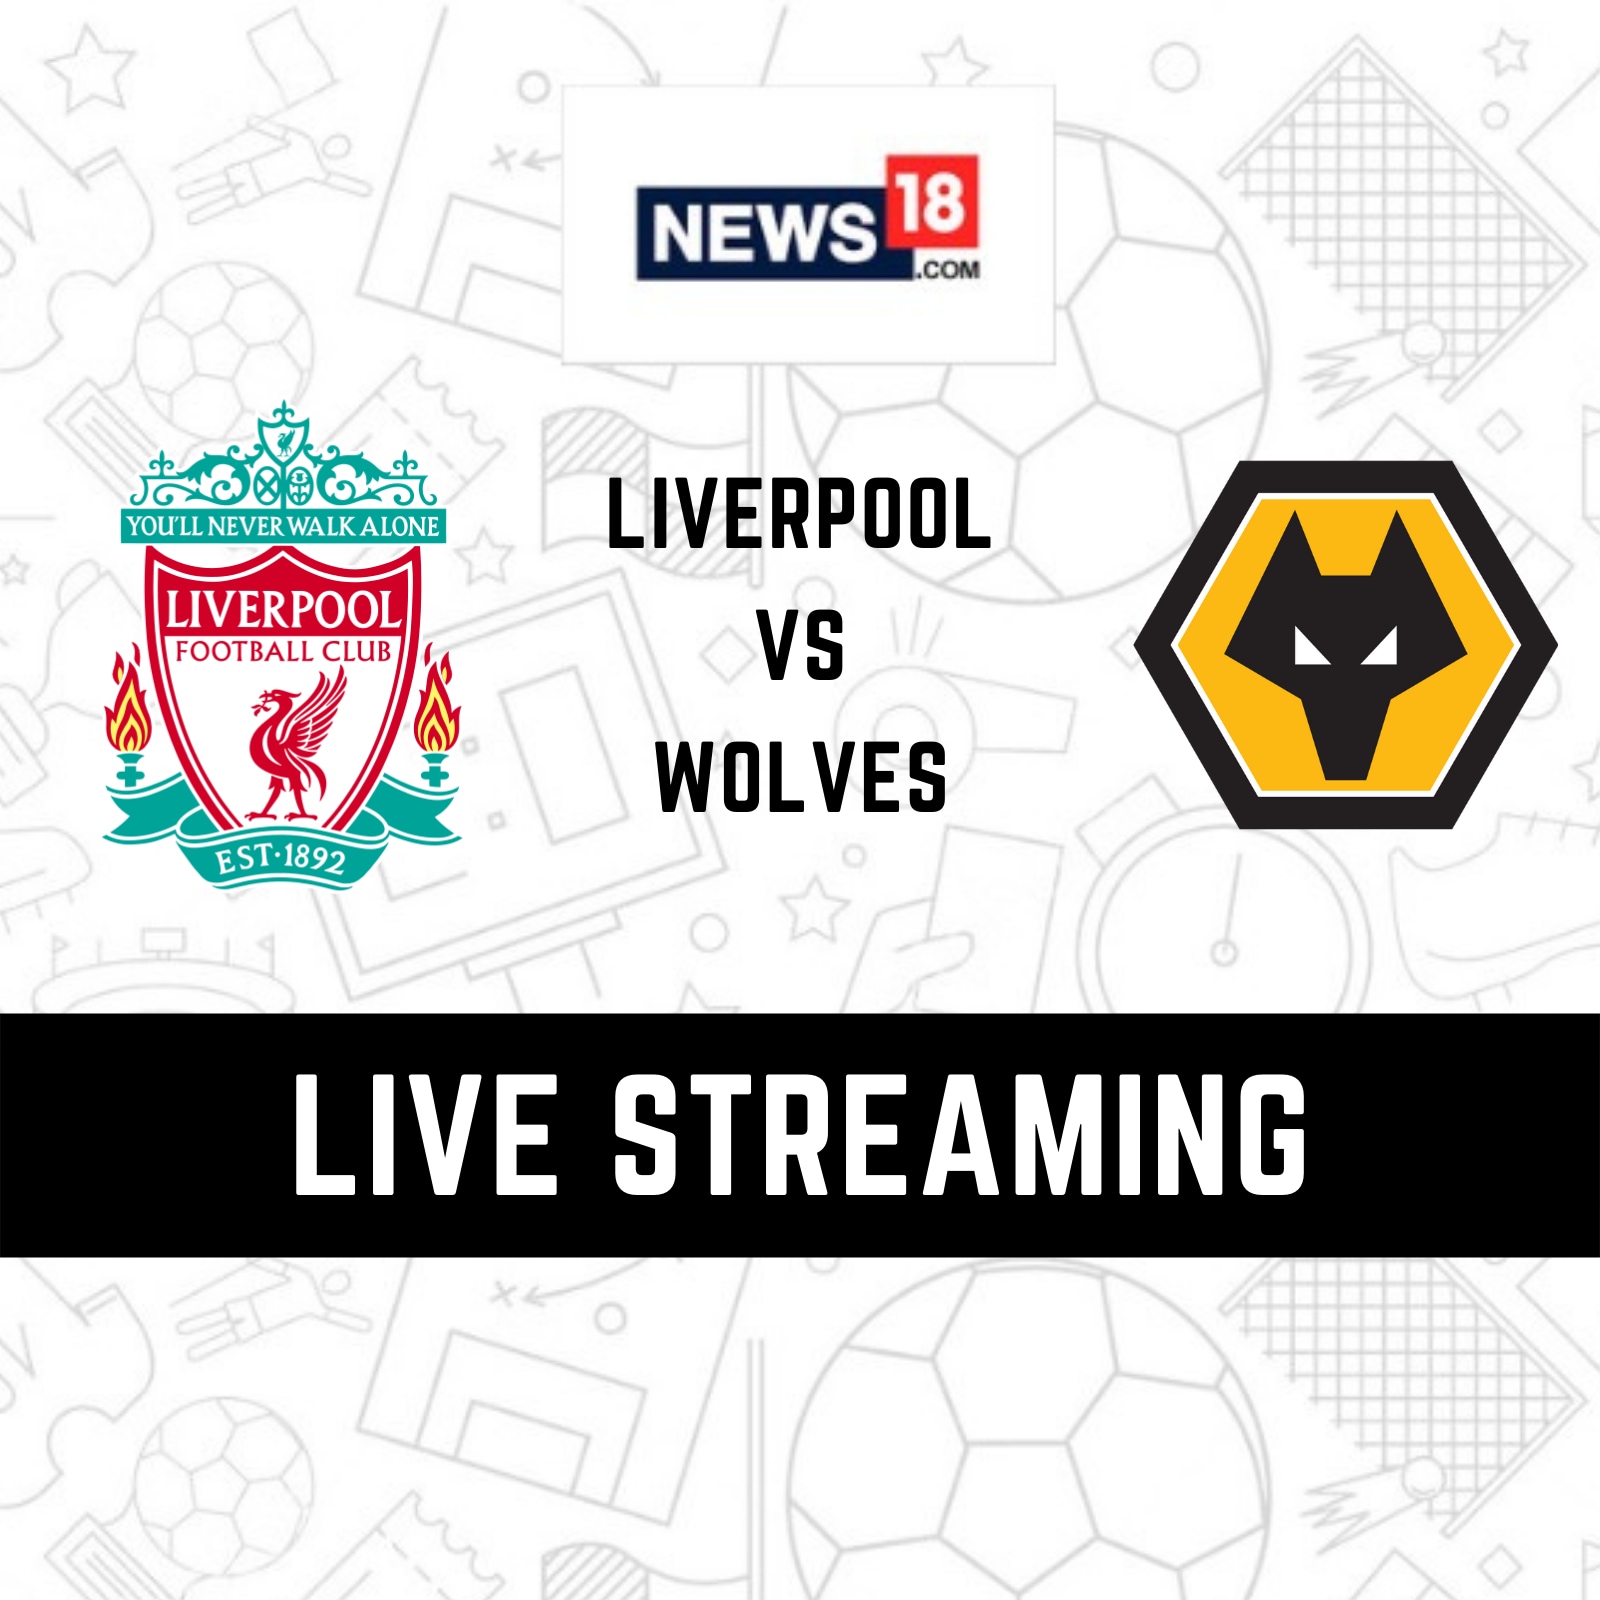 Premier League 2021-22 Liverpool vs Wolverhampton Wanderers LIVE Streaming When and Where to Watch Online, TV Telecast, Team News